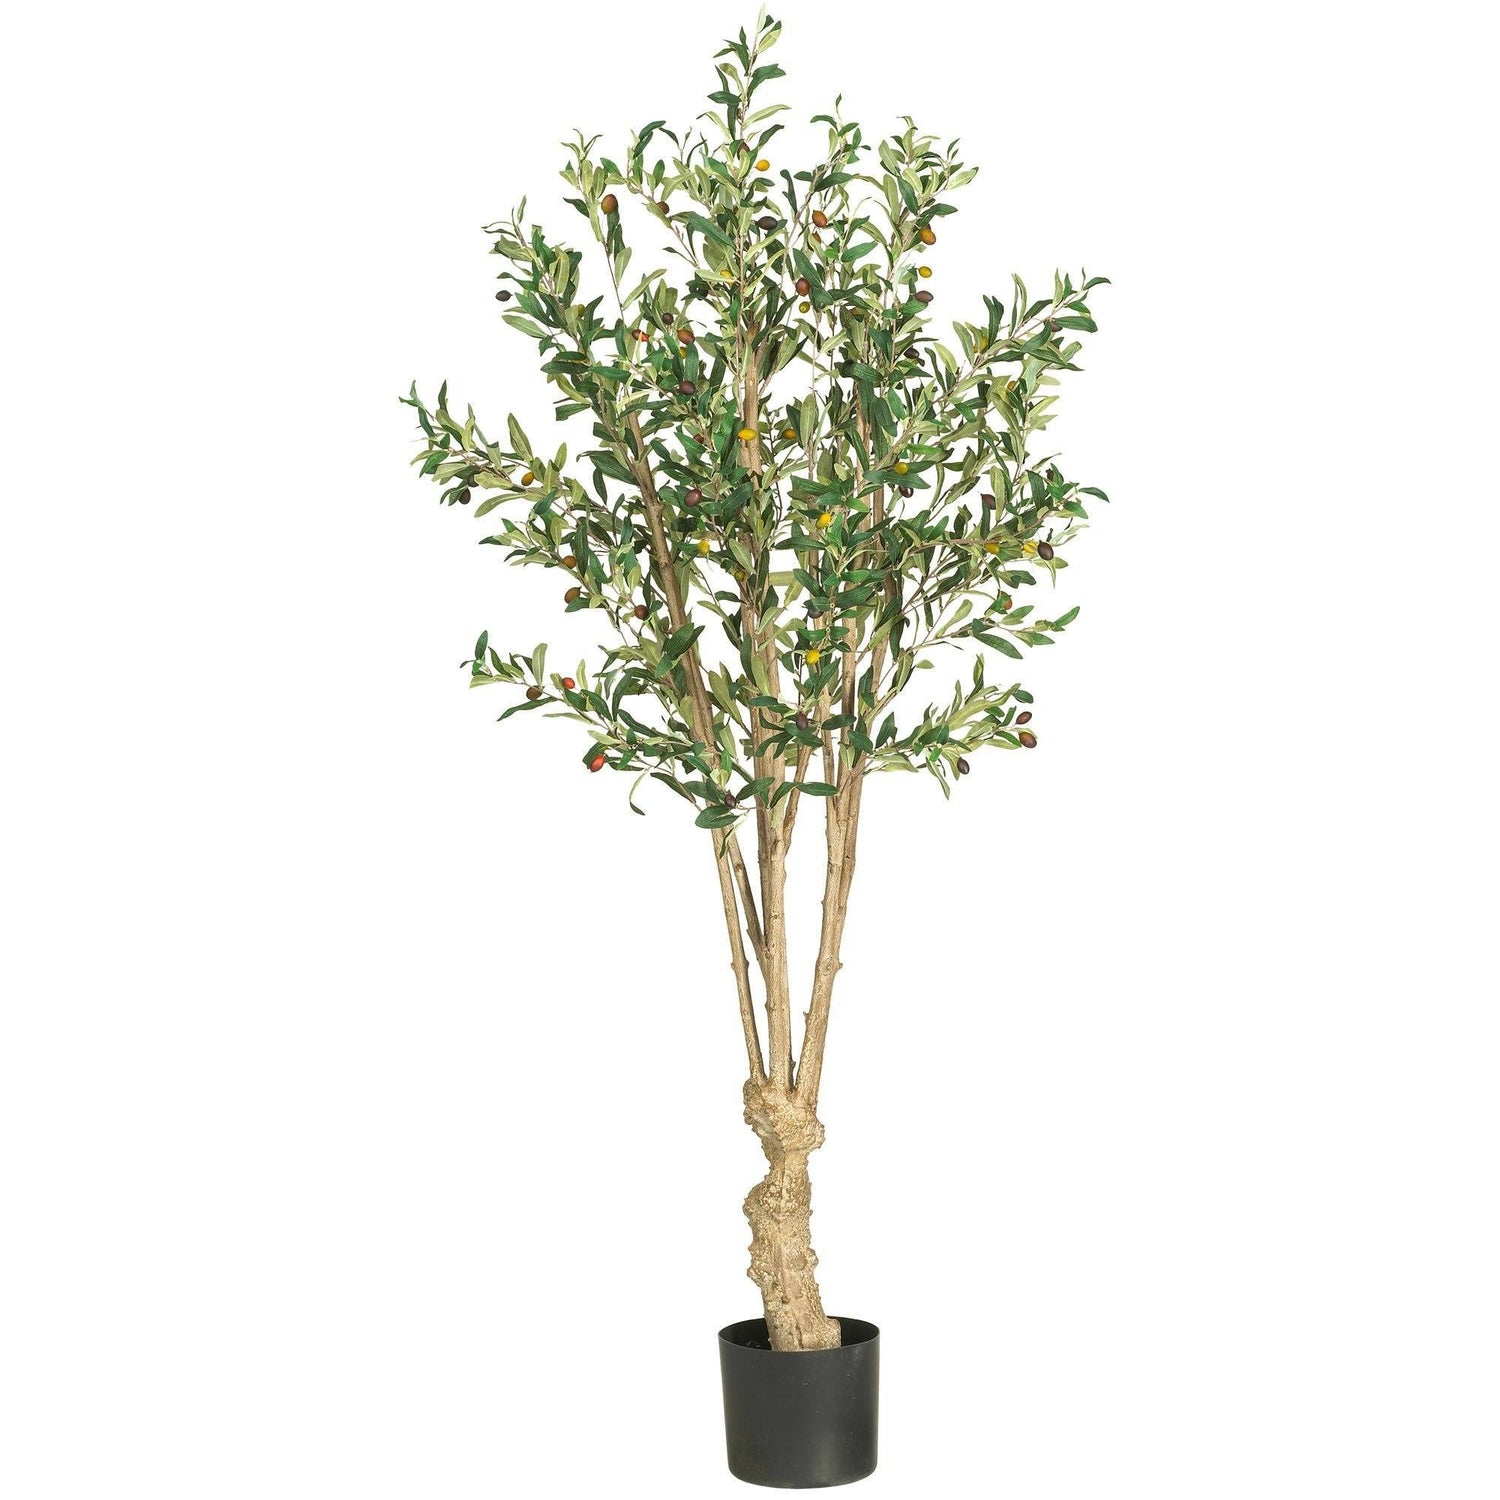 Faux Olive Trees Can Be Expensive, But Here Are 9 Under $75